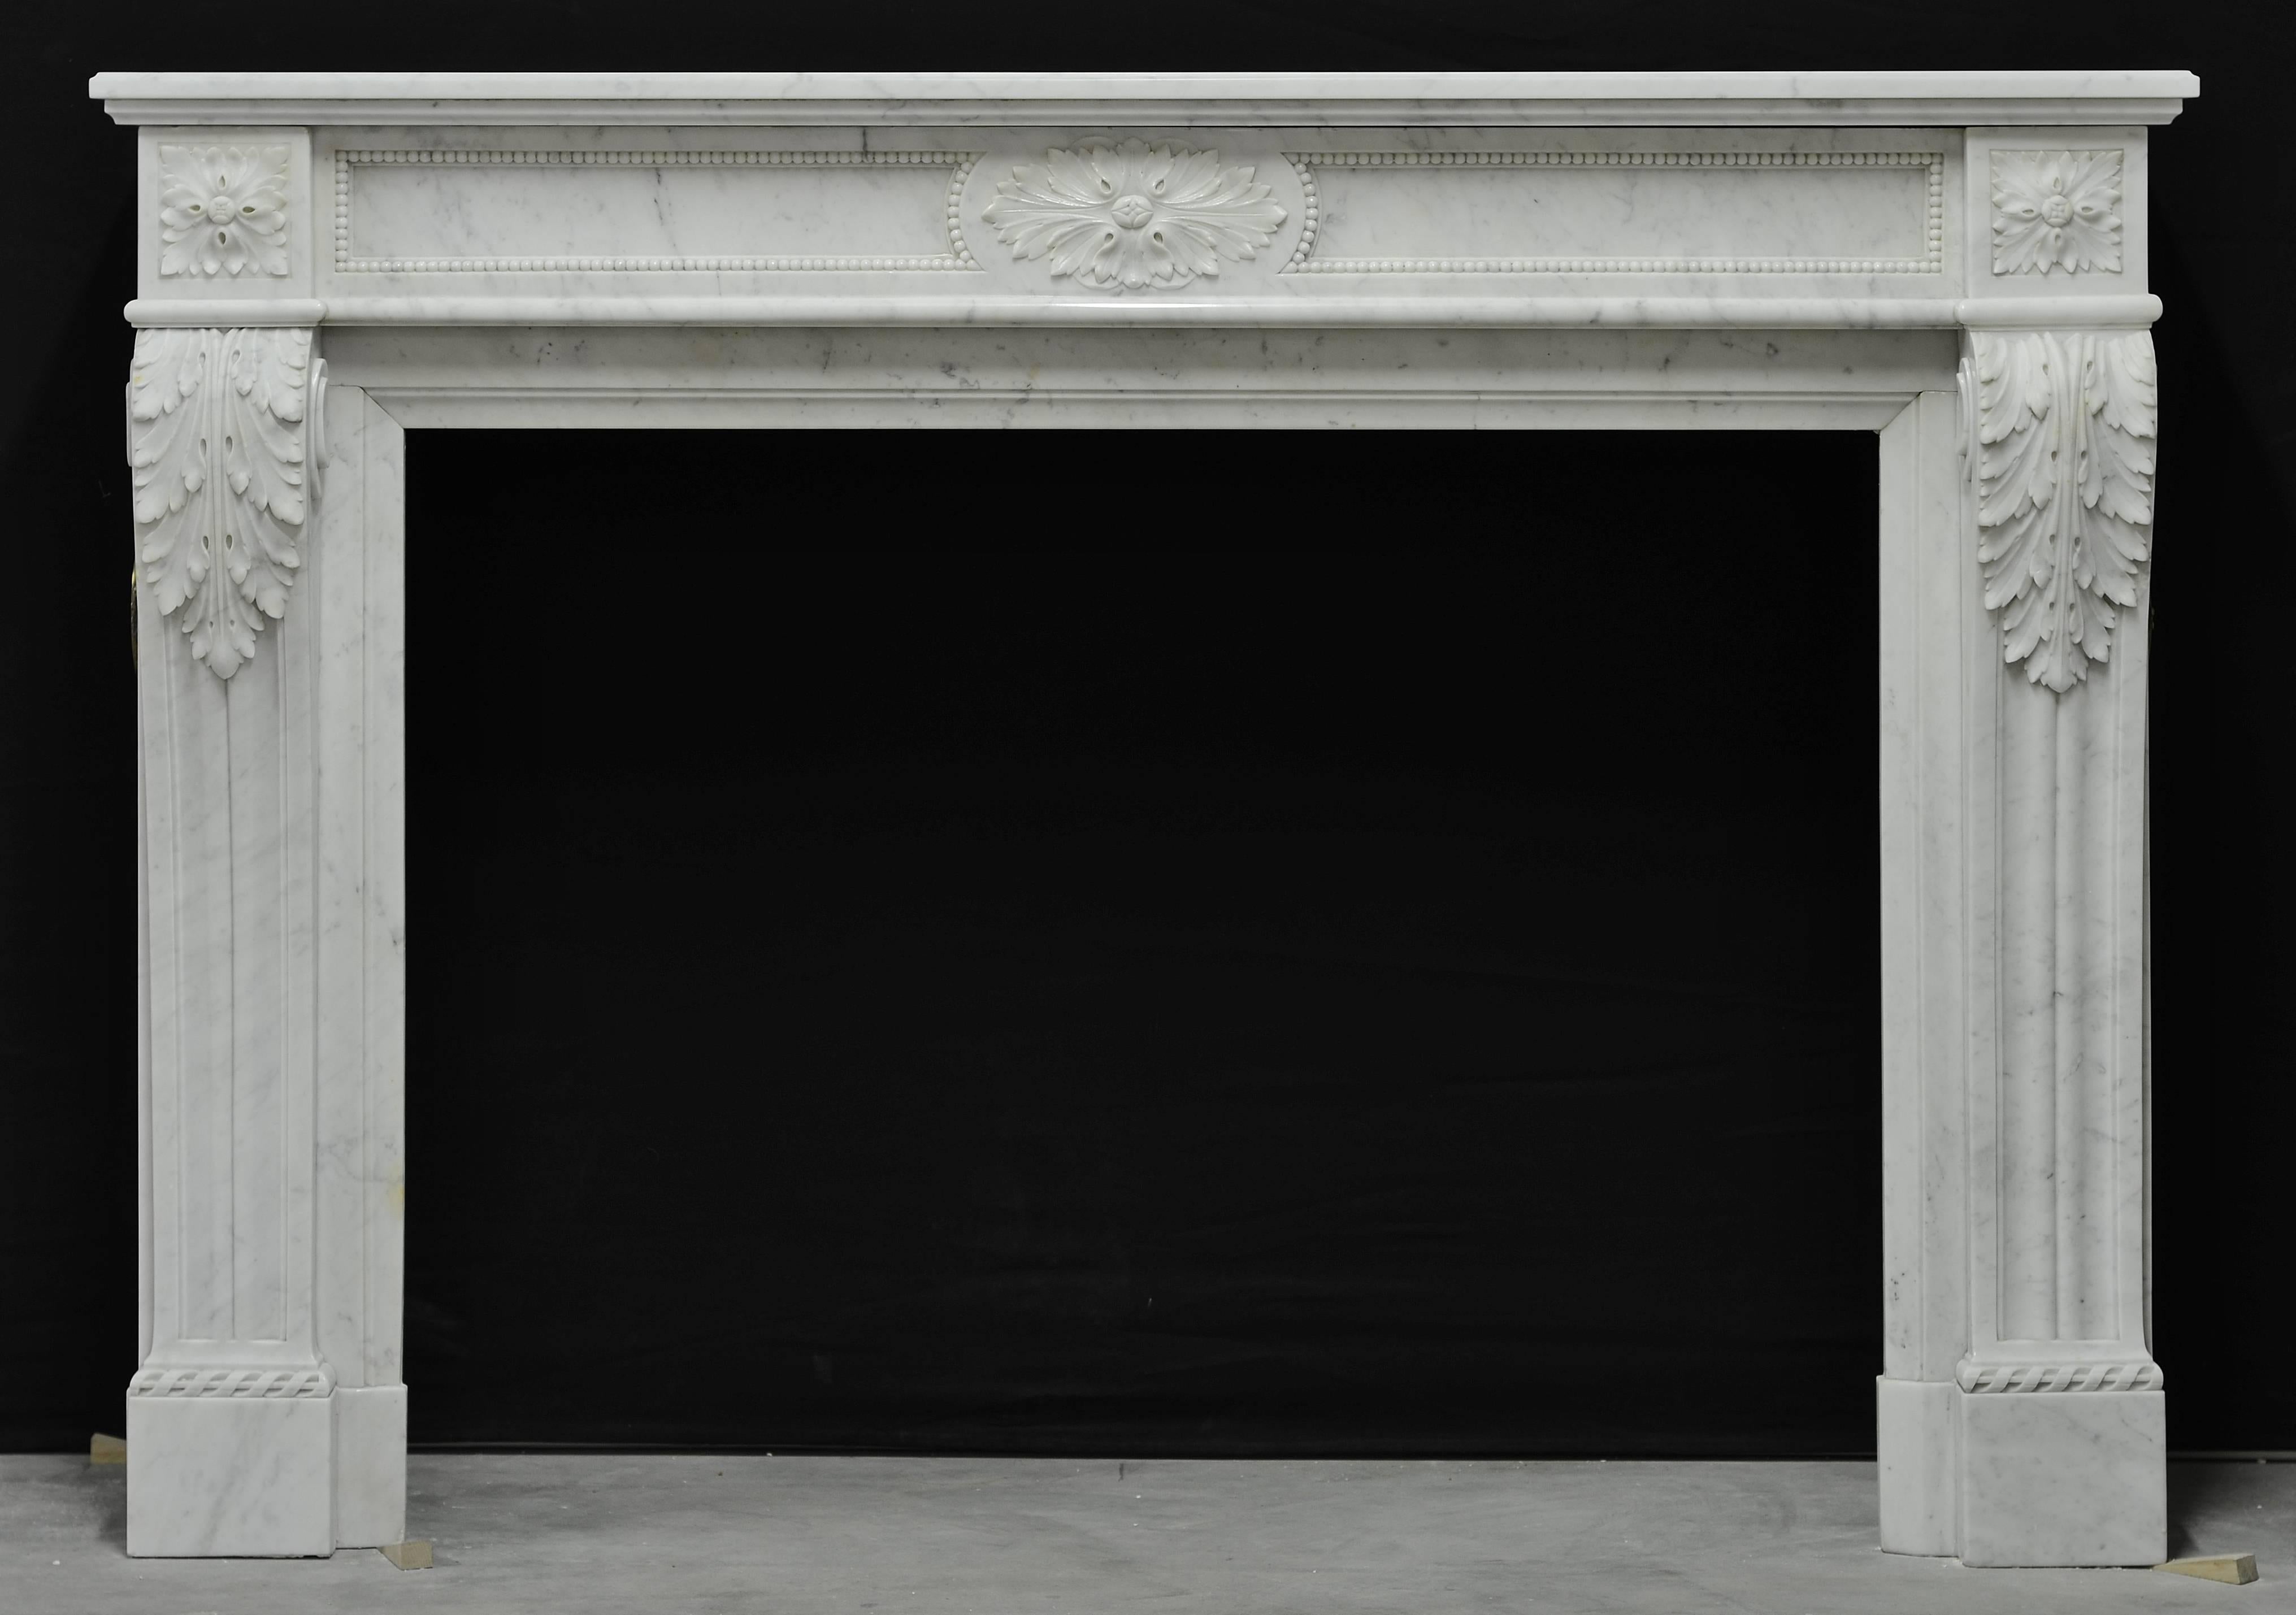 Beautiful detailed 19th century French Louis XVI fireplace mantel.
Executed in white Carrara marble from Italy.

Sold by Willem Schermerhorn Antique Fireplaces

Opening measurements: 33.0 x 342.9 inch or 84 x 109 cm (height x width).
Comes with